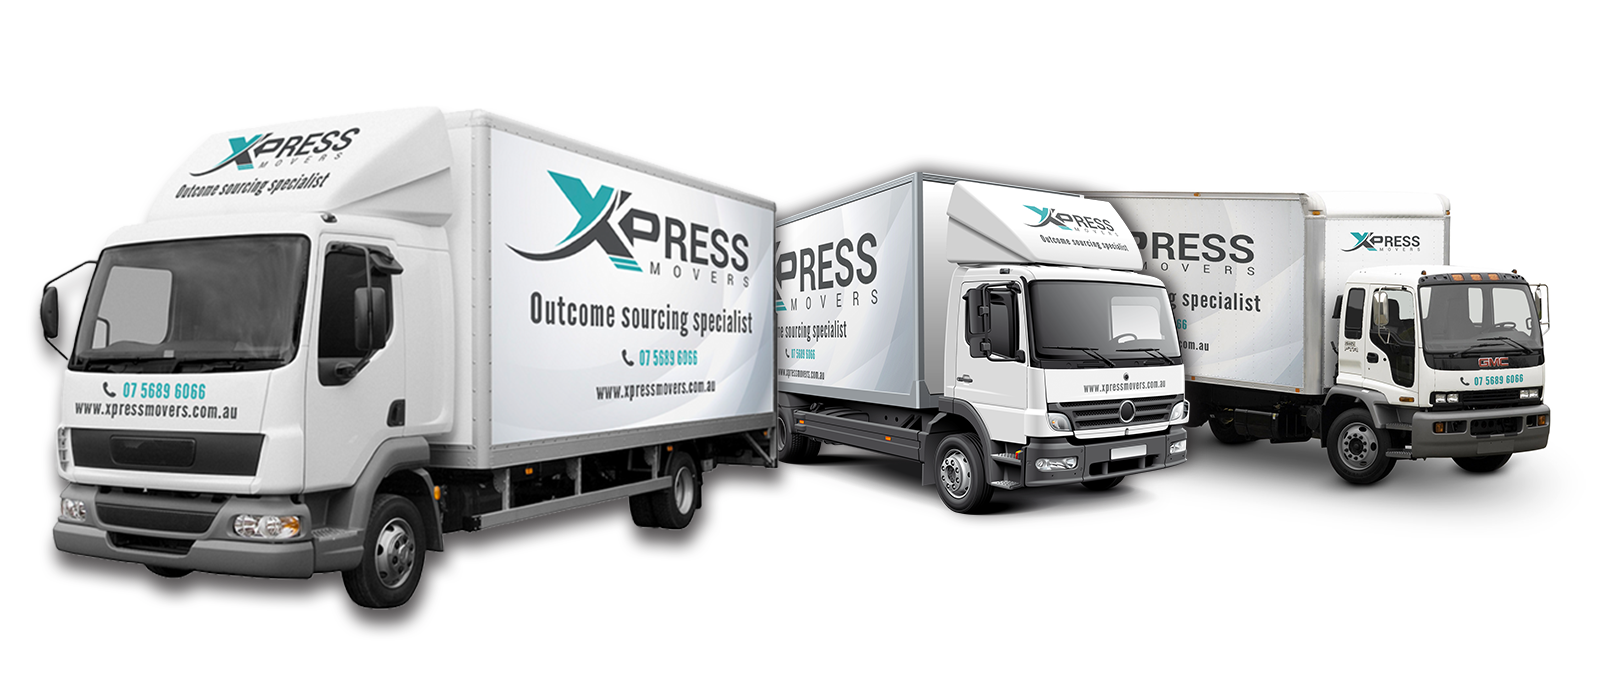 Xpress Movers - Removalist Brisbane Movers in Albion